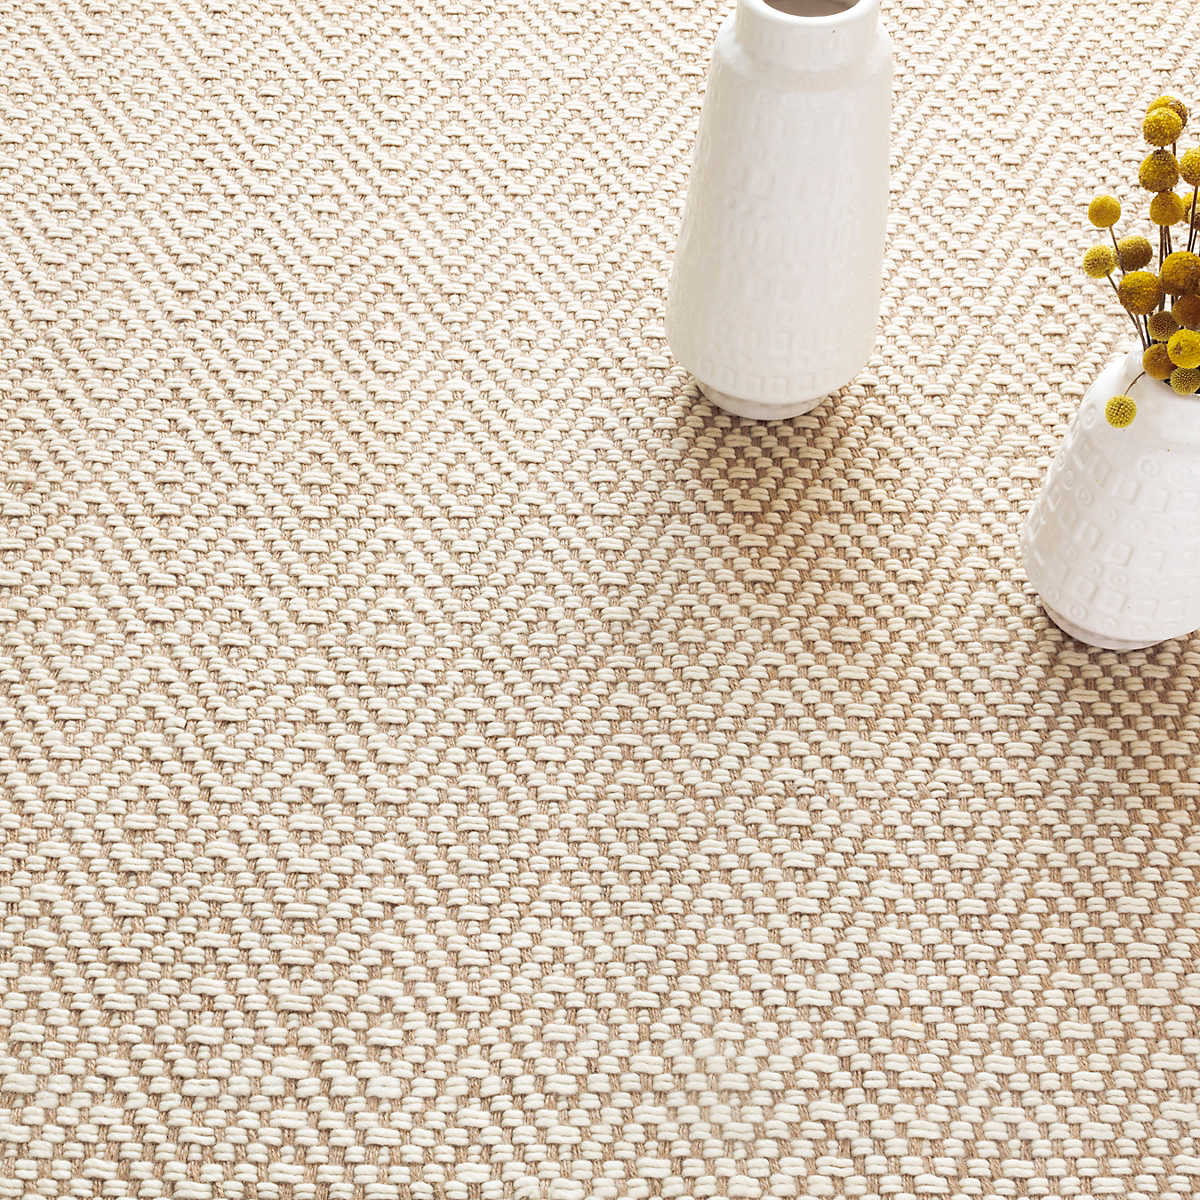 Cocchi Woven Wool Rug RUGS 